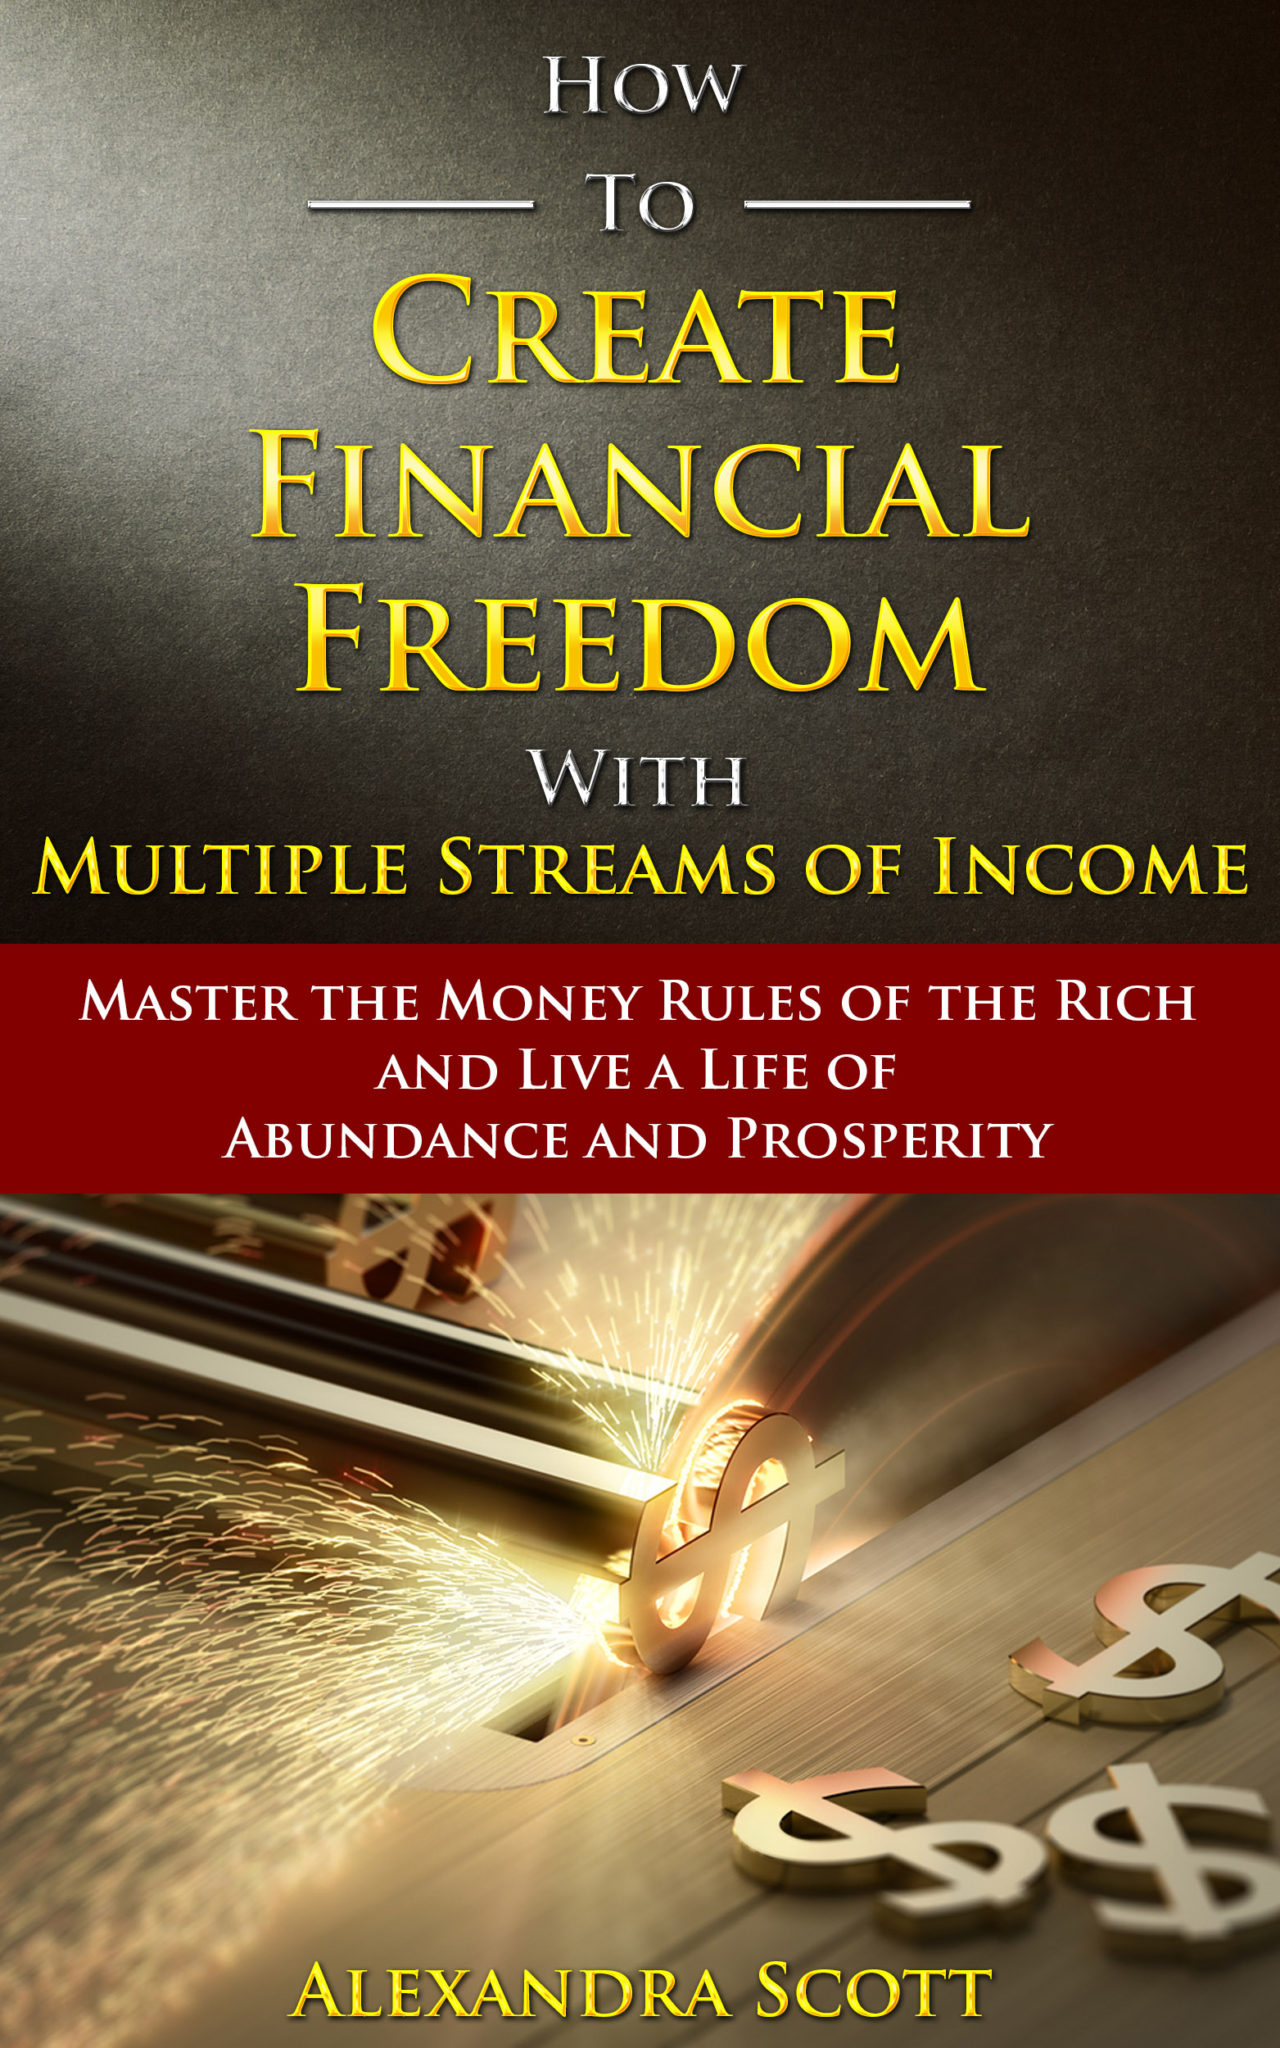 How to Create Financial Freedom with Multiple Streams of Income by Alexandra Scott by Alexandra Scott